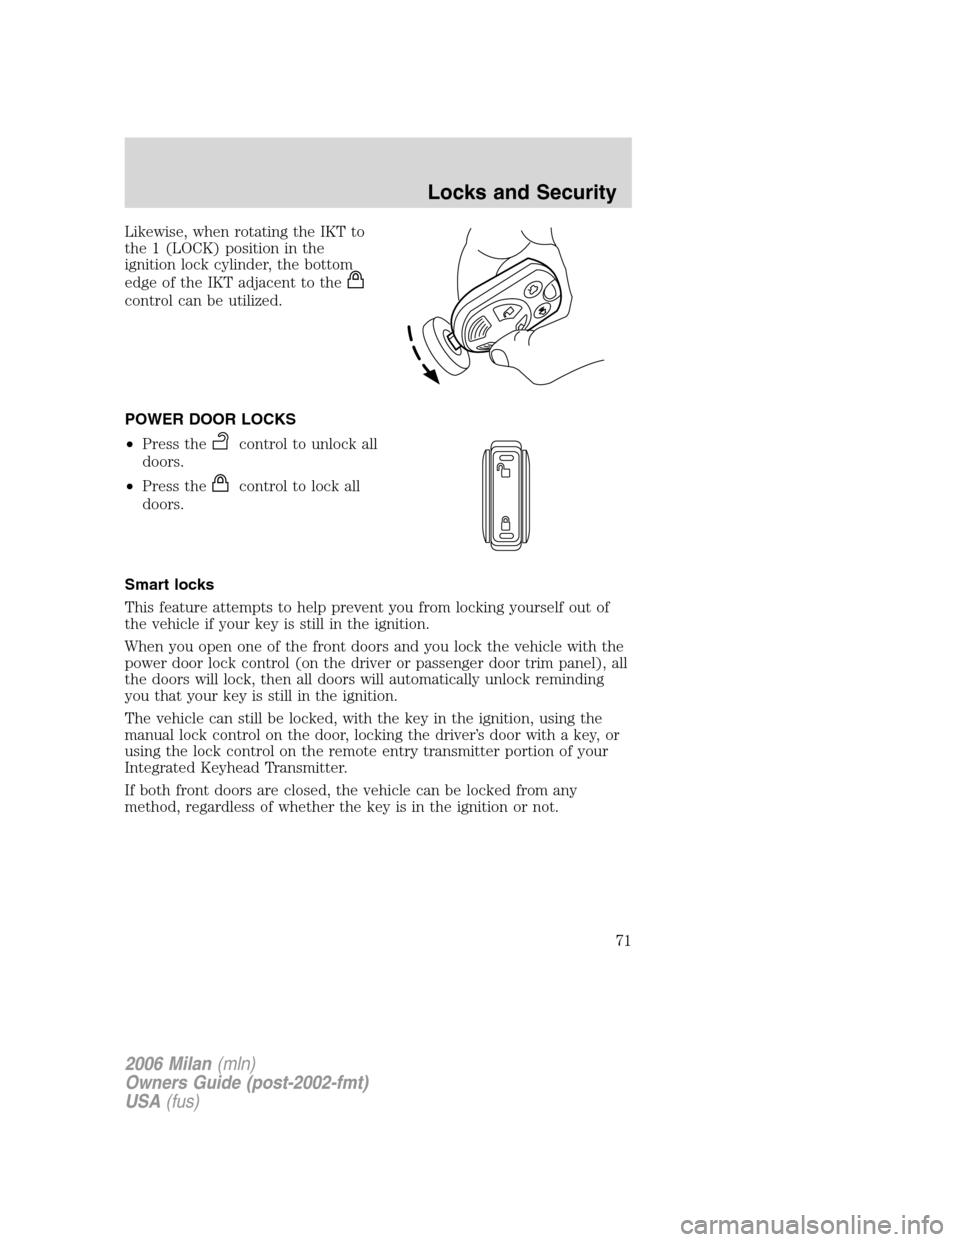 Mercury Milan 2006  Owners Manuals Likewise, when rotating the IKT to
the 1 (LOCK) position in the
ignition lock cylinder, the bottom
edge of the IKT adjacent to the
control can be utilized.
POWER DOOR LOCKS
•Press the
control to unl